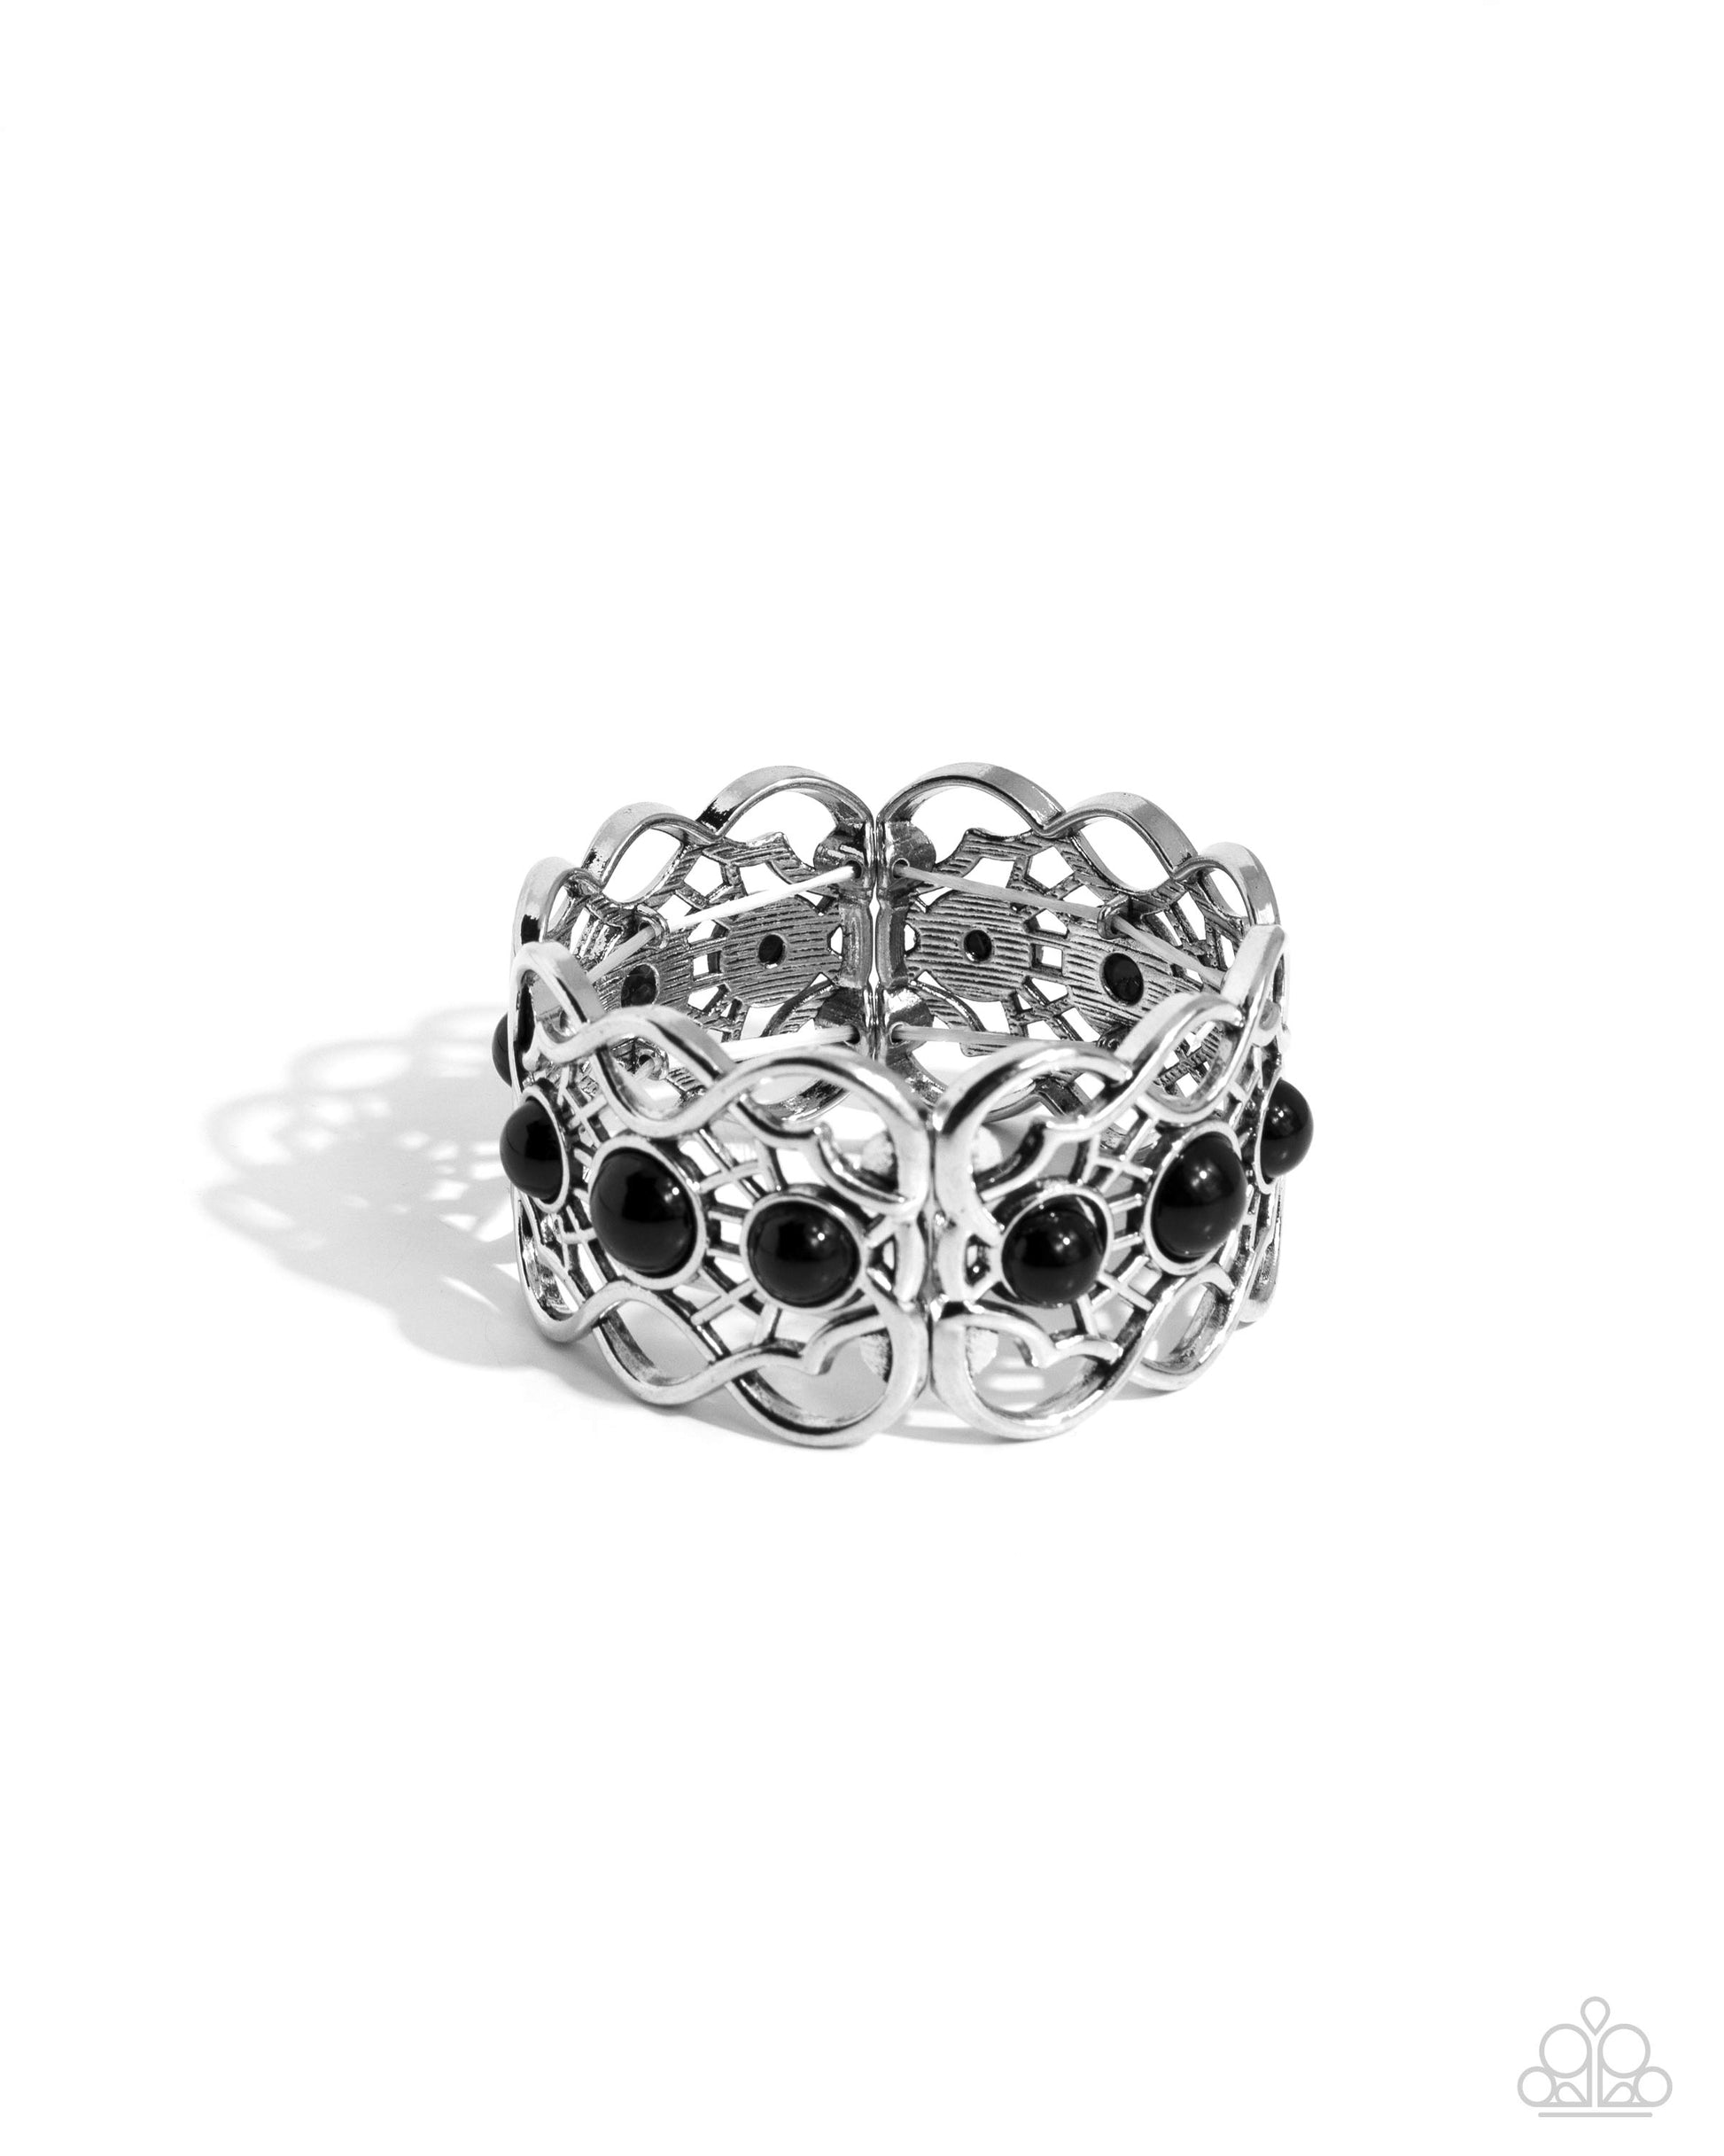 Very Versailles - Black and Silver Bracelet - Paparazzi Accessories - A trio of bubbly black beads adorn the centers of vine-like silver frames that are threaded along a stretchy band around the wrist, creating a whimsical centerpiece.